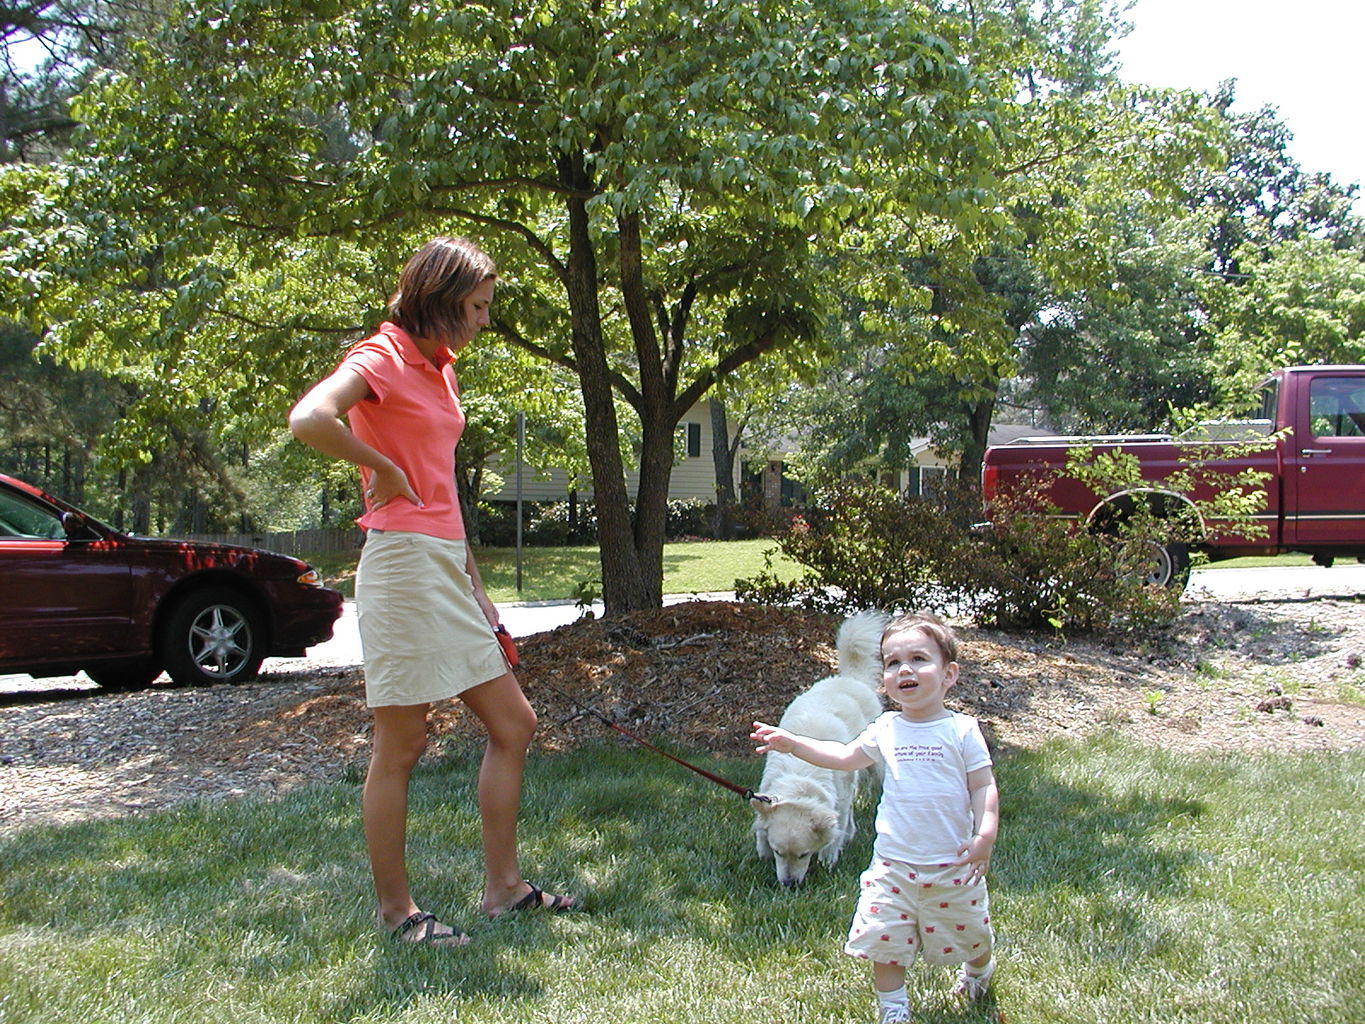 Mother's Day 2004
